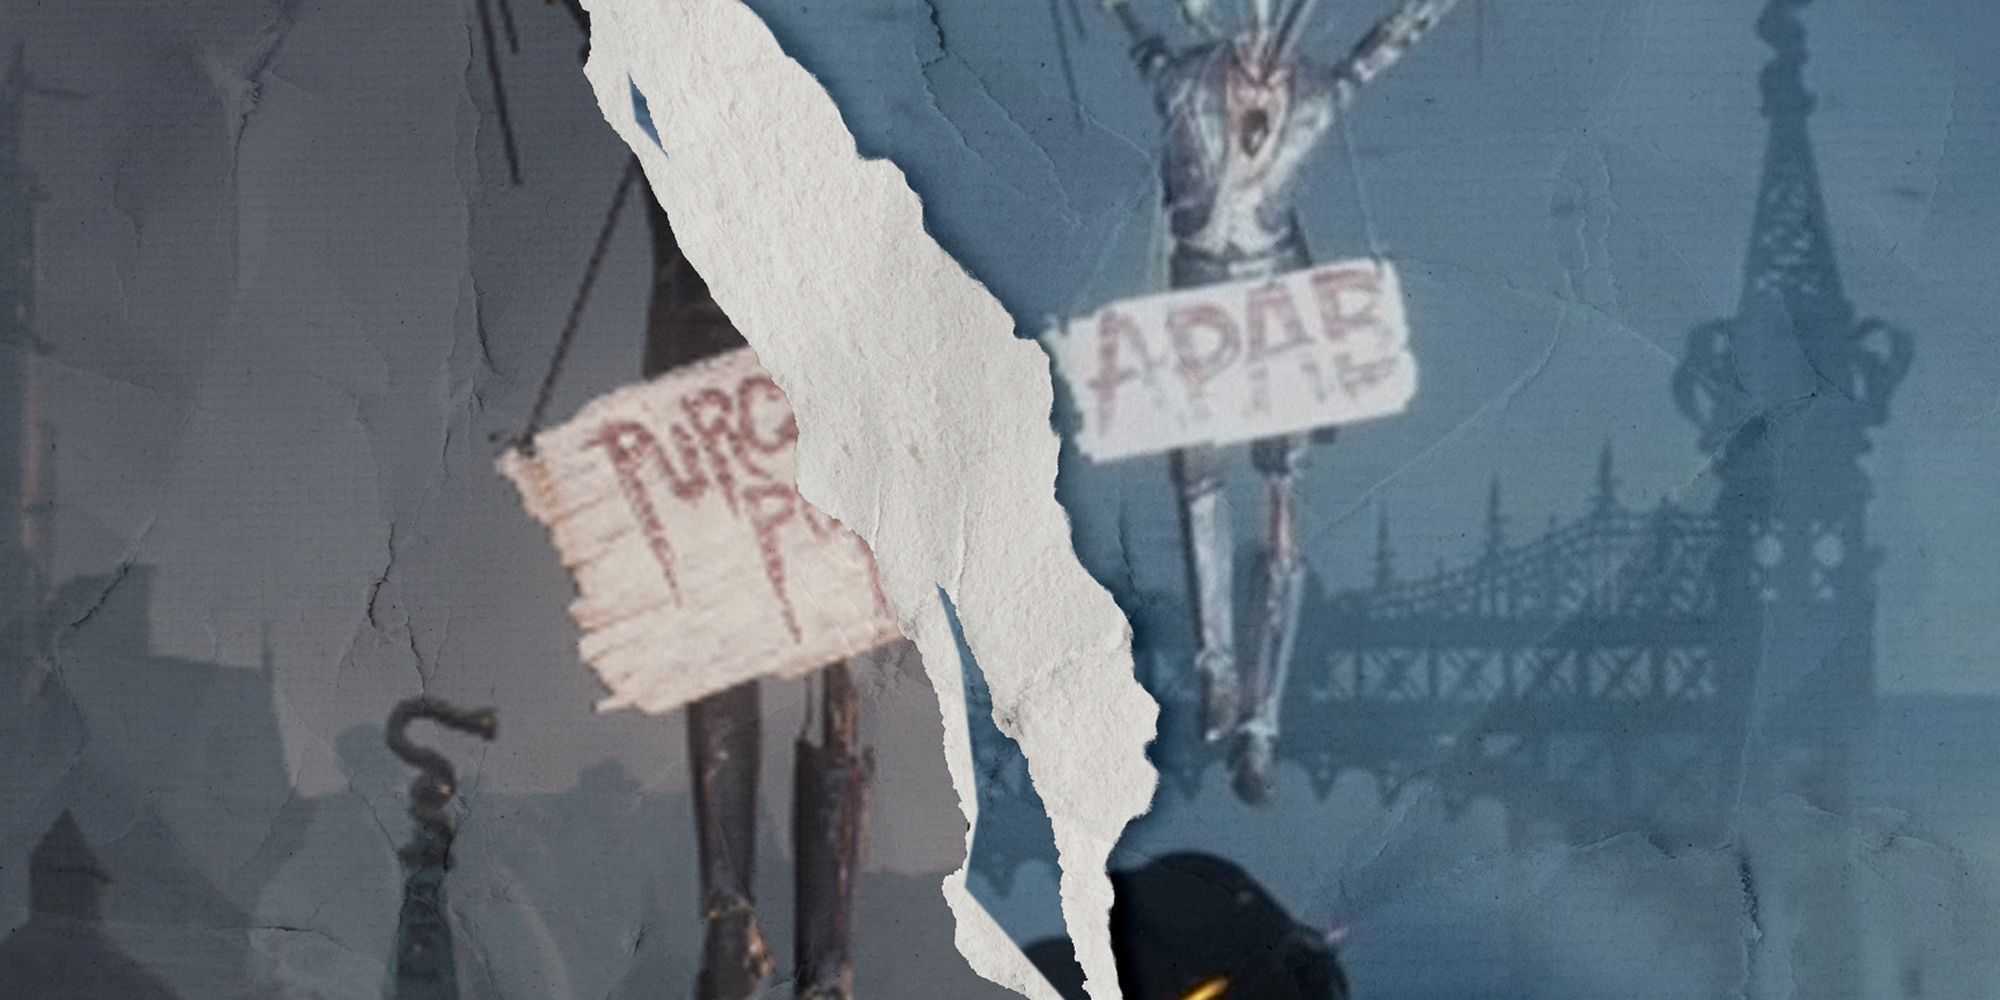 Lies of P old APAB sign and new Purge Puppets sign